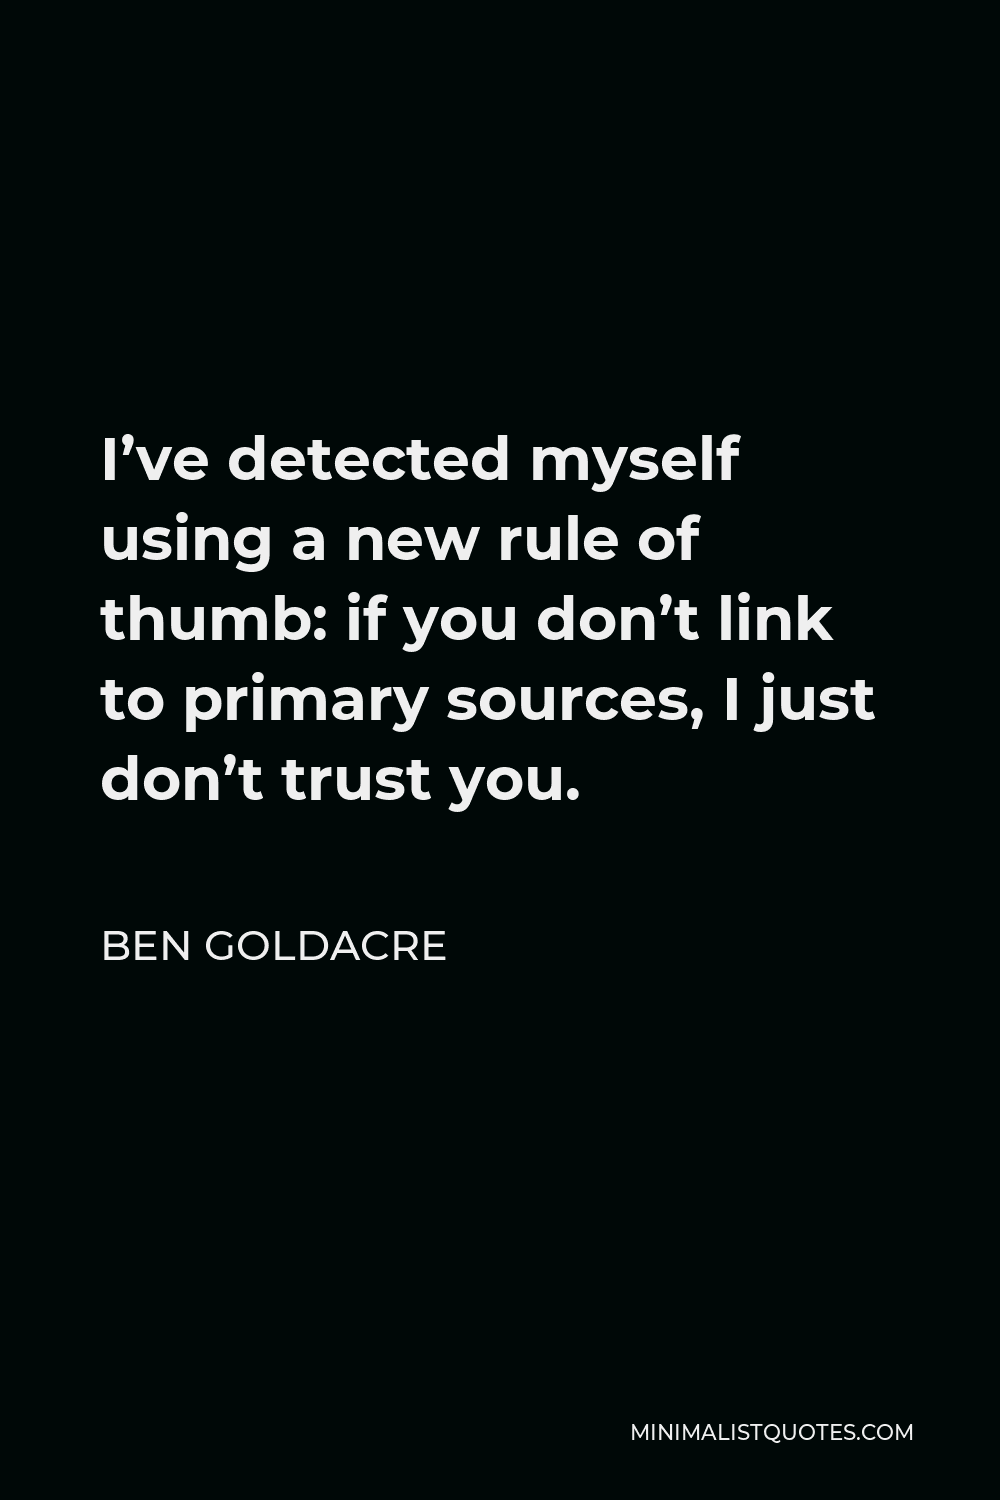 Ben Goldacre Quote - I’ve detected myself using a new rule of thumb: if you don’t link to primary sources, I just don’t trust you.